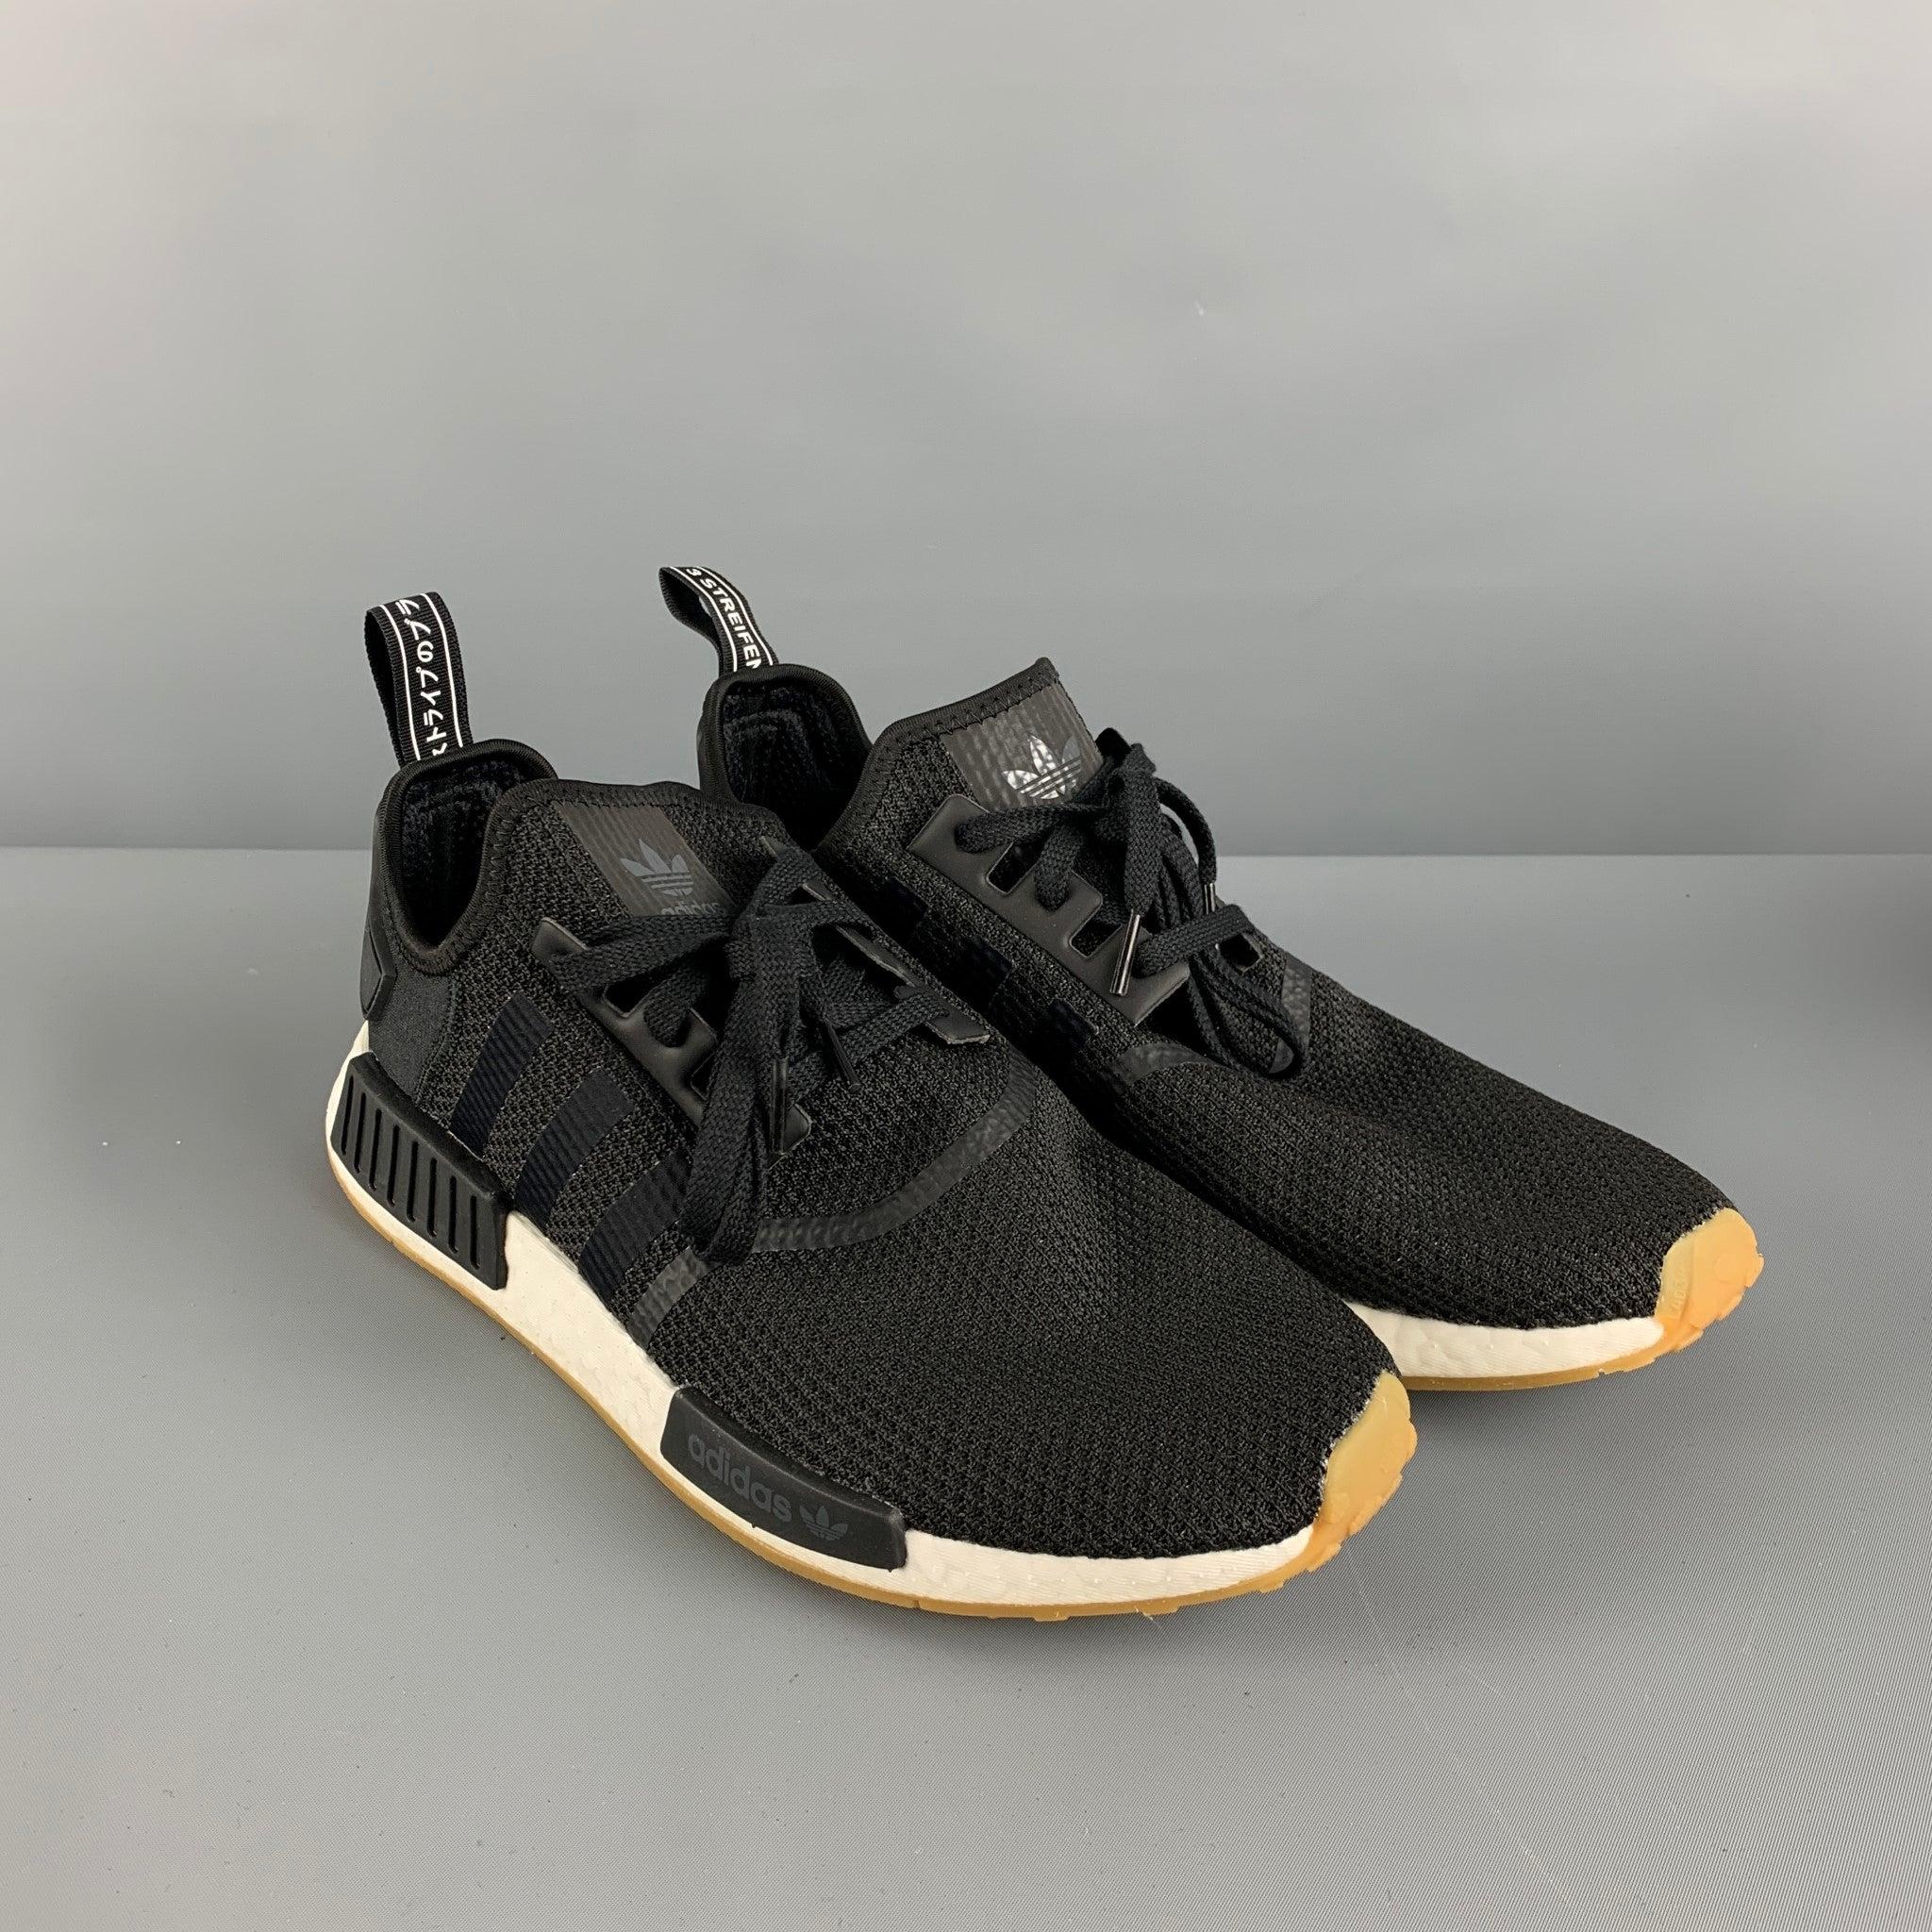 ADIDAS NMD_R1 Boost sneakers comes in a black woven nylon featuring the iconic striped design, rubber details, and a lace up closure.Good Pre-Owned Condition. 

Marked:   13Outsole: 13 inches  x 4 inches 
  
  
 
Reference: 126426
Category: